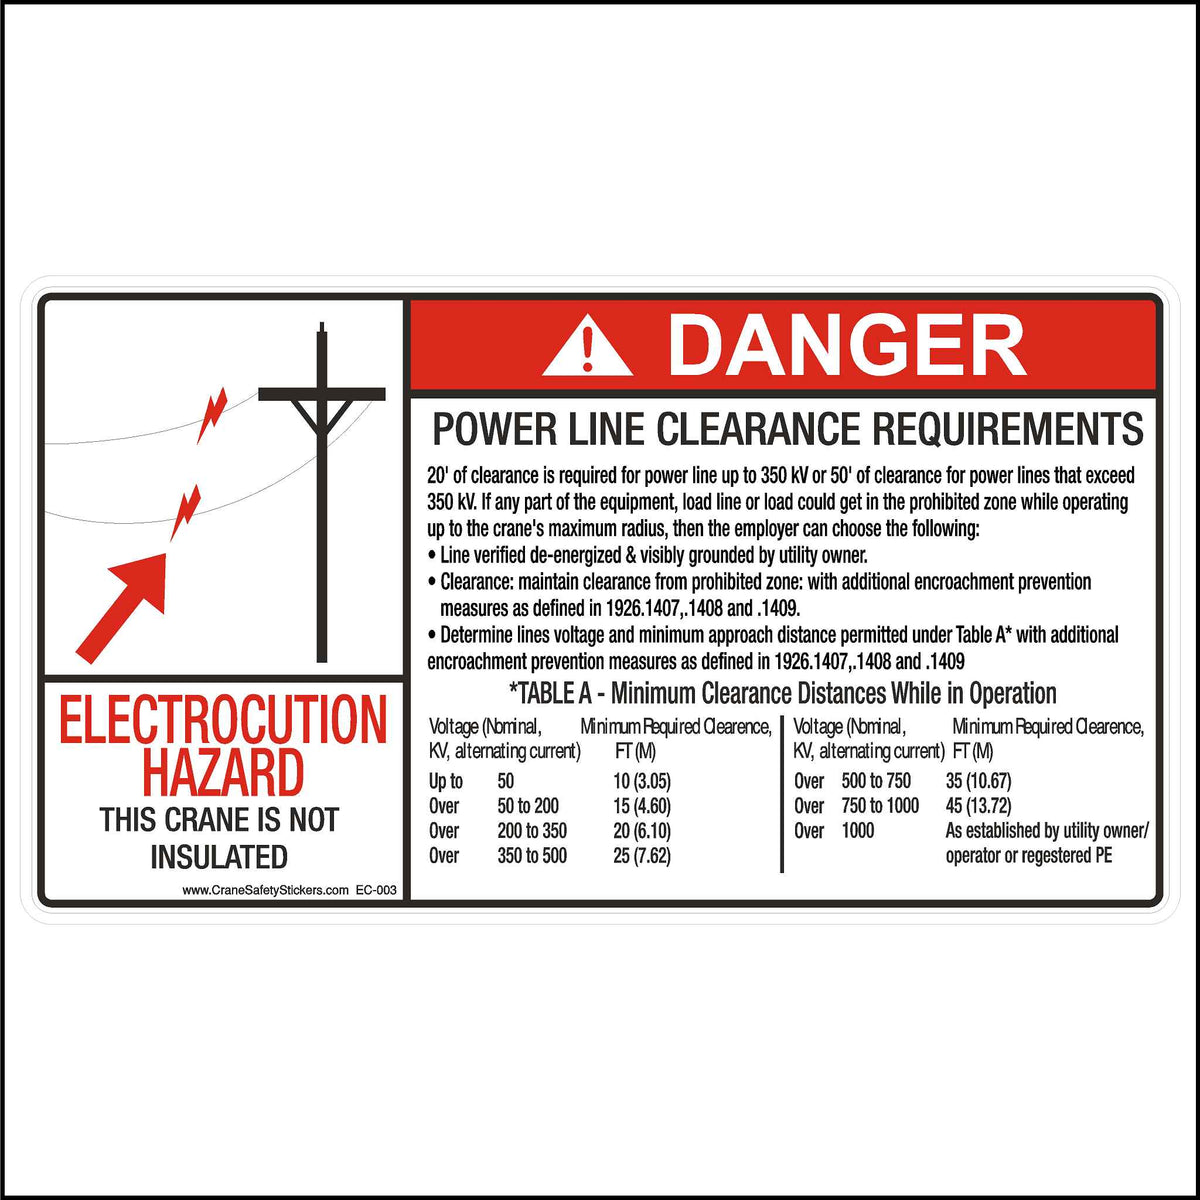 Crane Power Line Clearance Requirements Safety Decal Printed with, DANGER Electrical Hazard Overhead Power Line Clearance Requirements.  20&#39; of clearance is required for power lines up to 350 kV or 50&#39; of clearance for power lines that exceed 350 kV. If any part of the equipment, load line, or load could get in the prohibited zone while operating up to the crane&#39;s maximum radius, then the employer can choose the following: